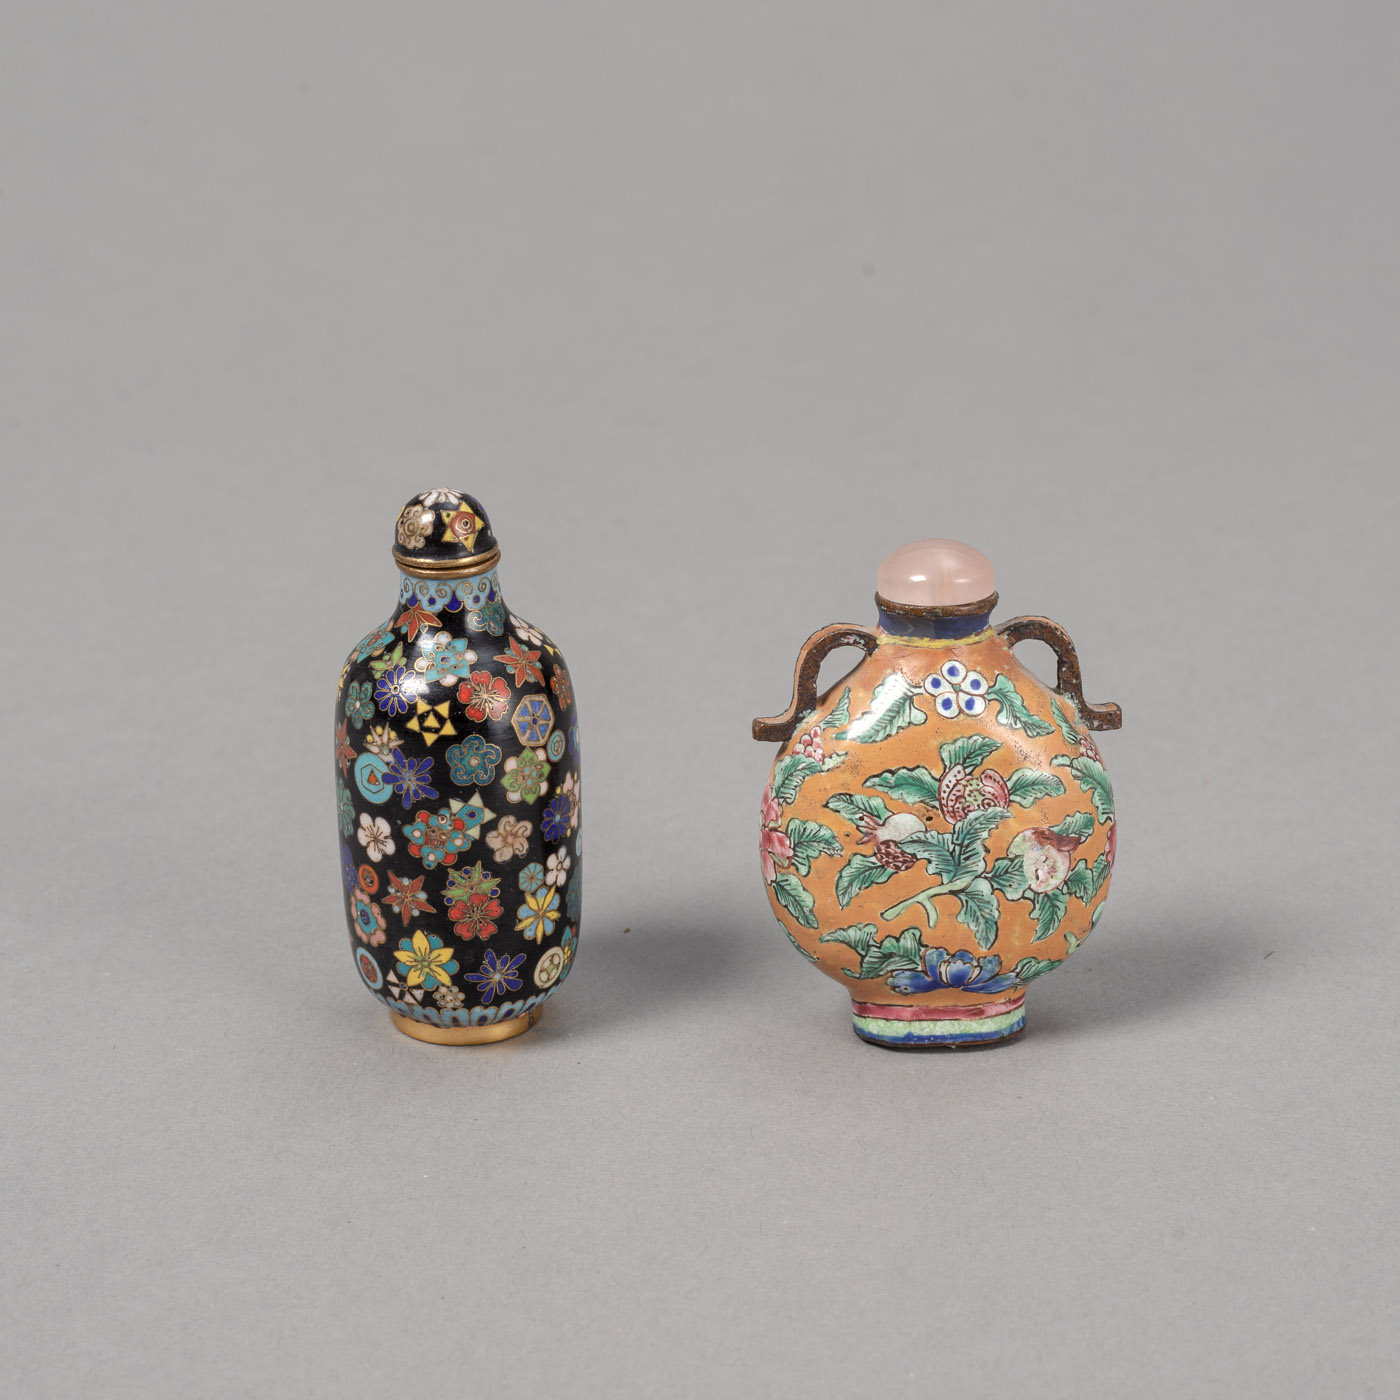 <b>A CLOISONNÉ SNUFFBOTTLE WITH MILLEFIORI MOTIF ON A BLACK GROUND AND A CANTON ENAMEL SNUFFBOTTLE DEPICTING THE 'SANDUO' FRUITS</b>